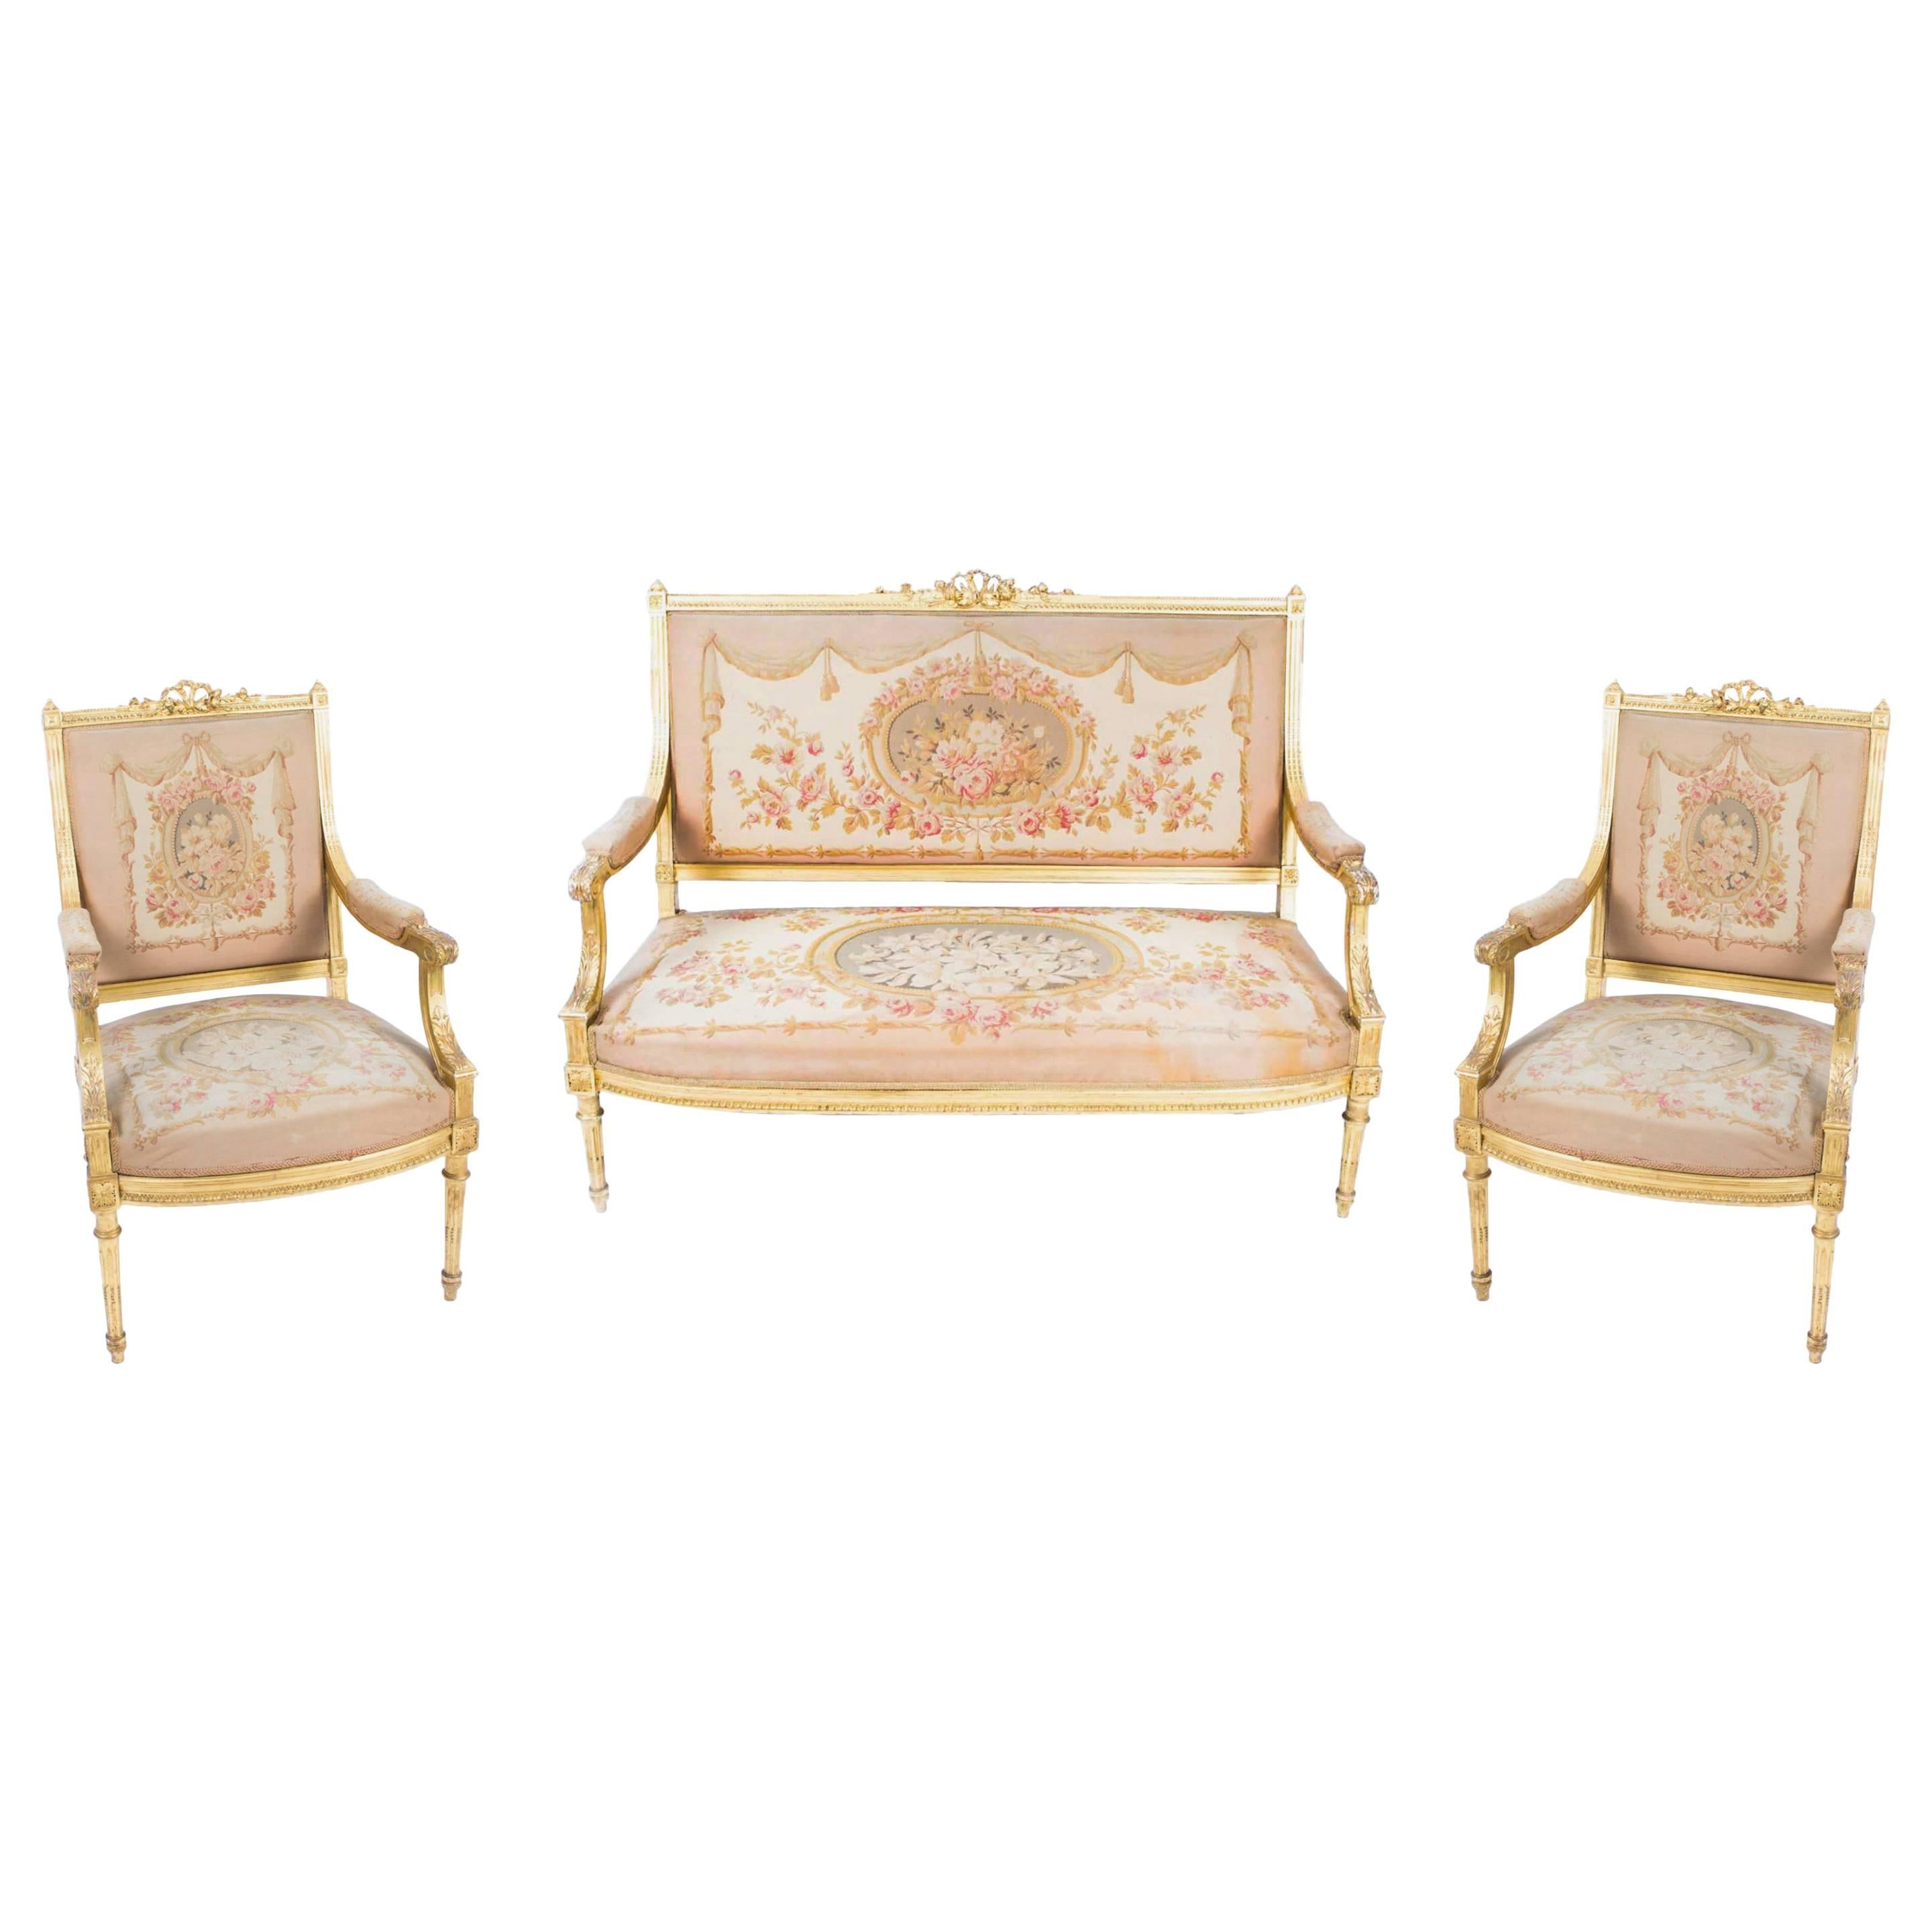 Antique 19th Century French Giltwood Three-Piece Suite Maple & Co.